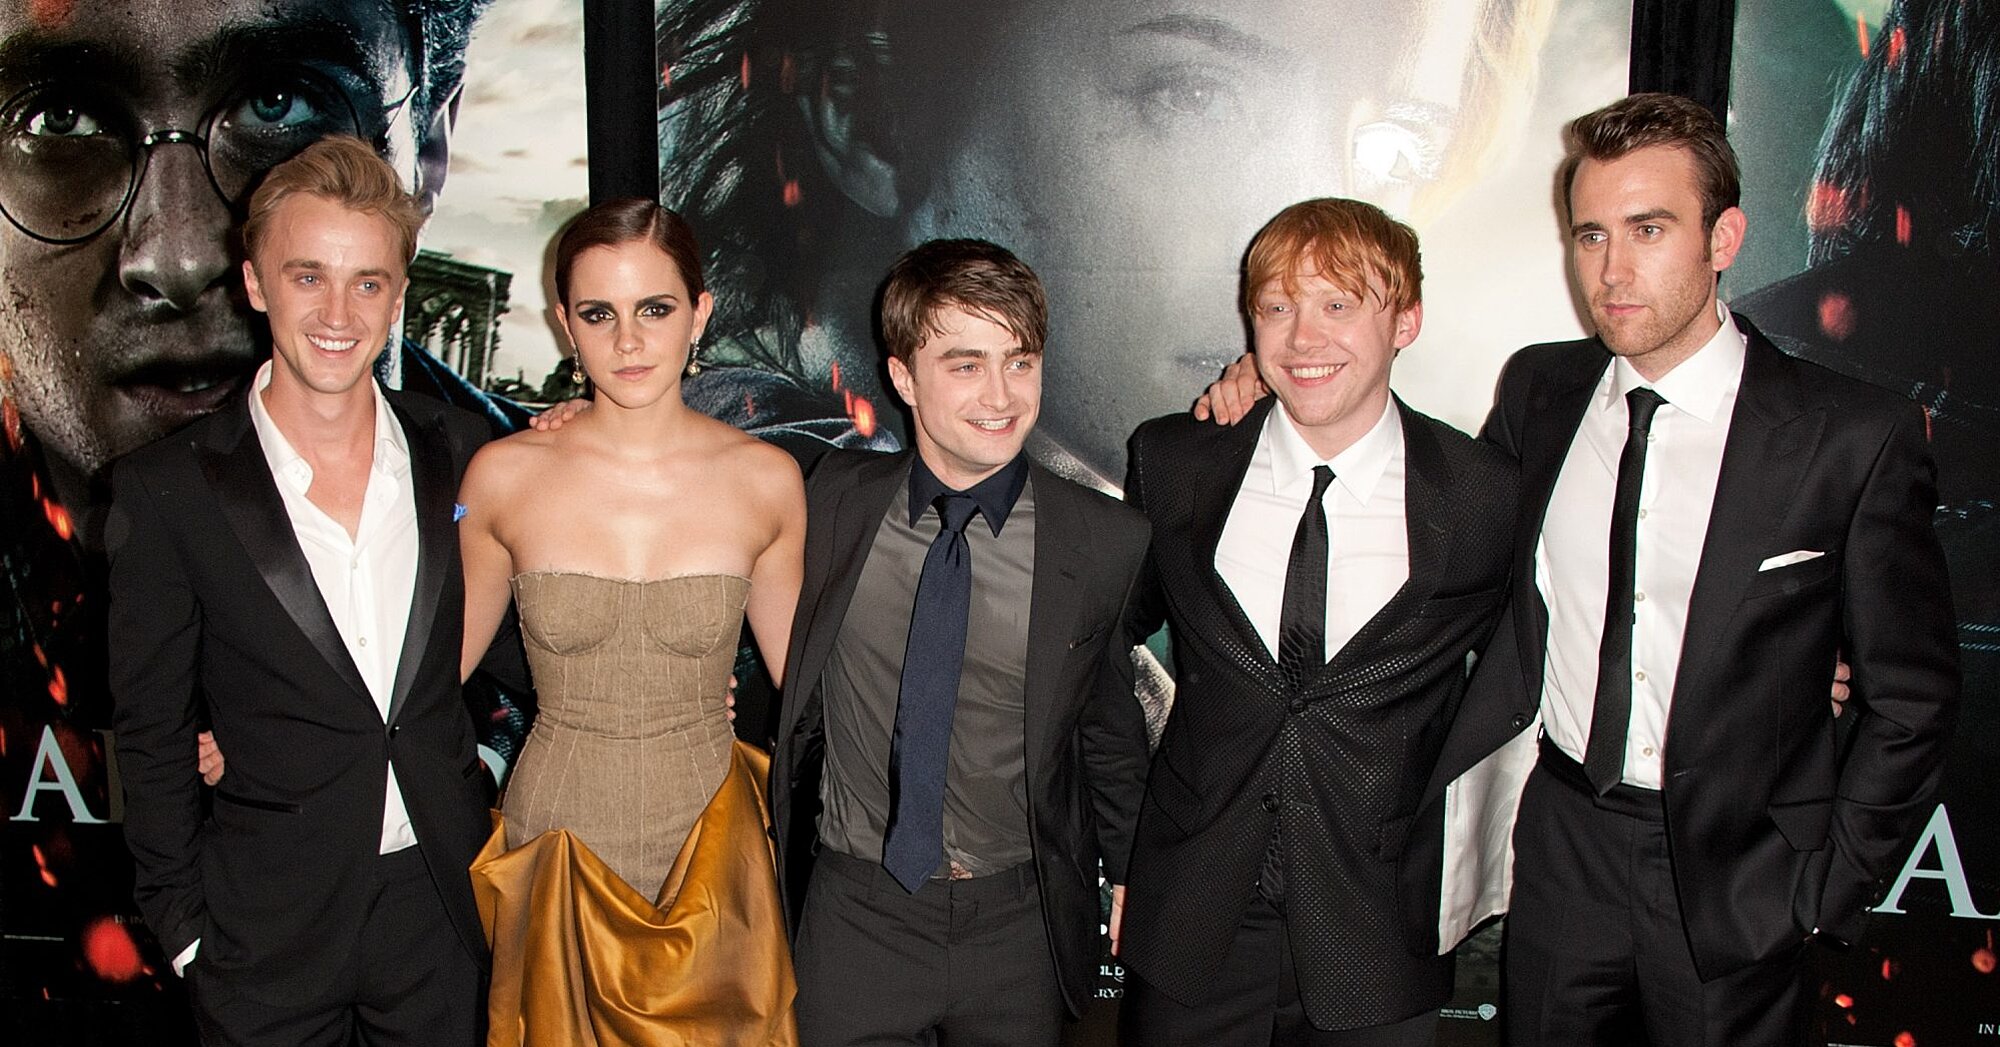 The Cast Of Harry Potter Reunited 19 Years After The First Film Premiered Hellogiggles